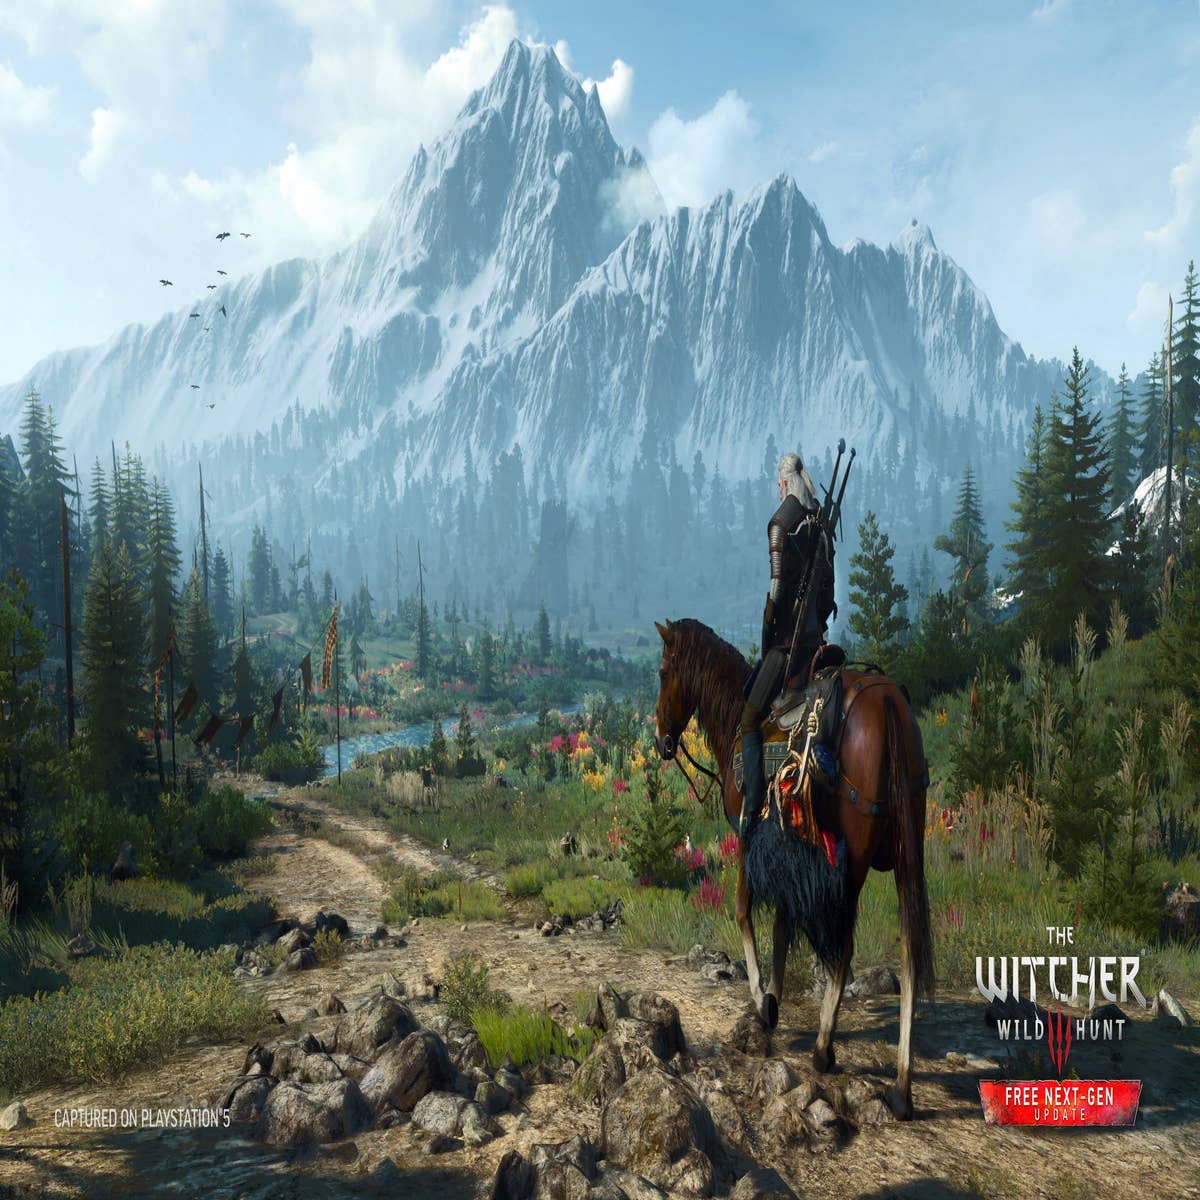 This mod brings the atmosphere of The Witcher 2 to The Witcher 3